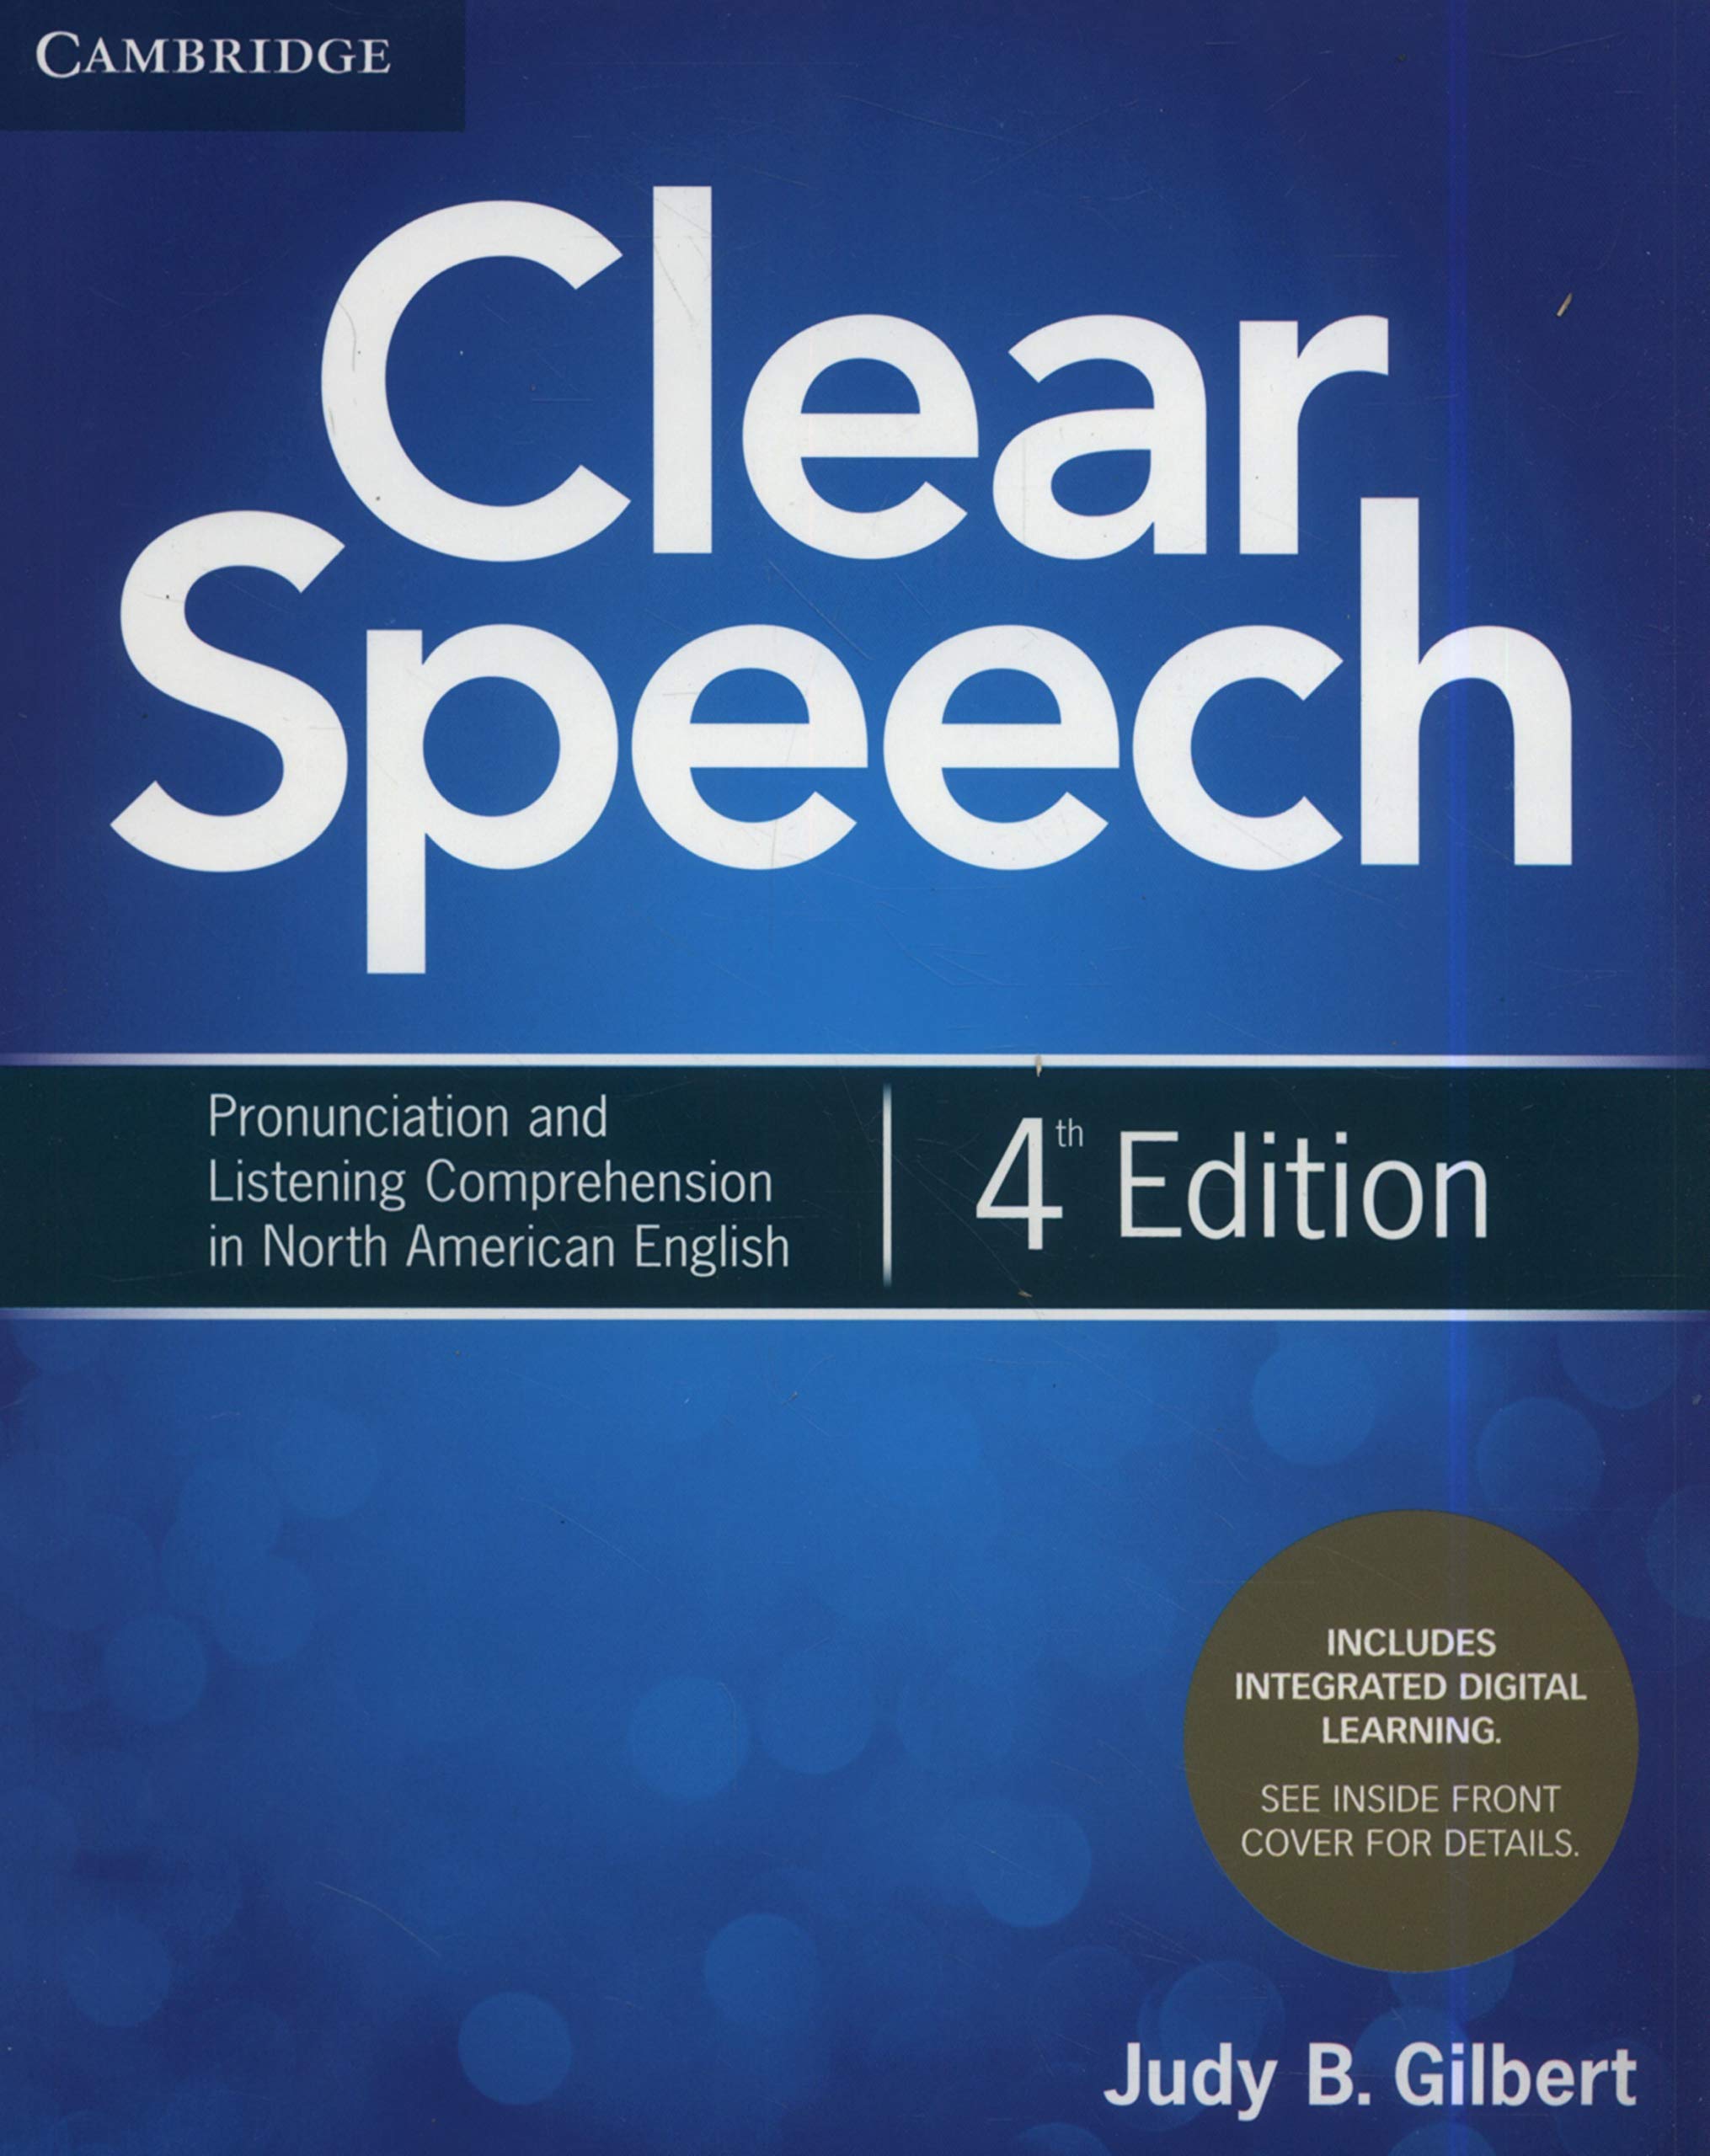 Mua Clear Speech Student's Book with Integrated Digital Learning:  Pronunciation and Listening Comprehension in North American English trên  Amazon Mỹ chính hãng 2023 | Giaonhan247